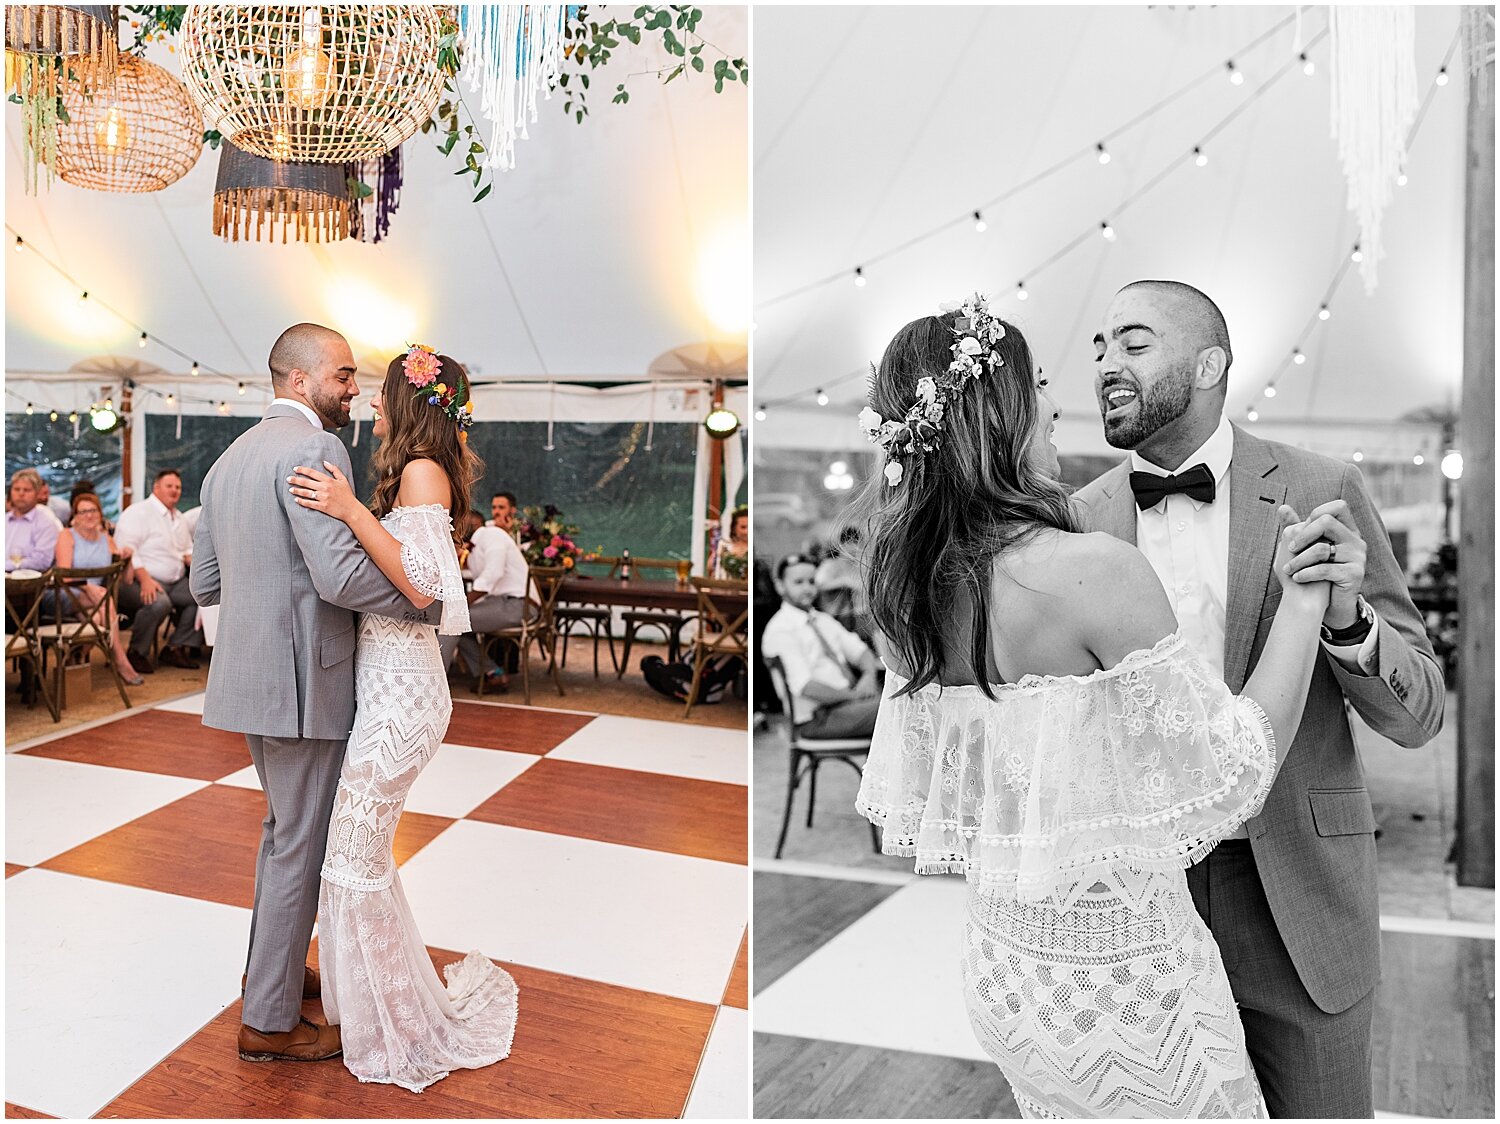 Bohemian Dream Tented Wedding by wedding planners A Charming Fete and Cleveland wedding photographer Lindsey Ramdin